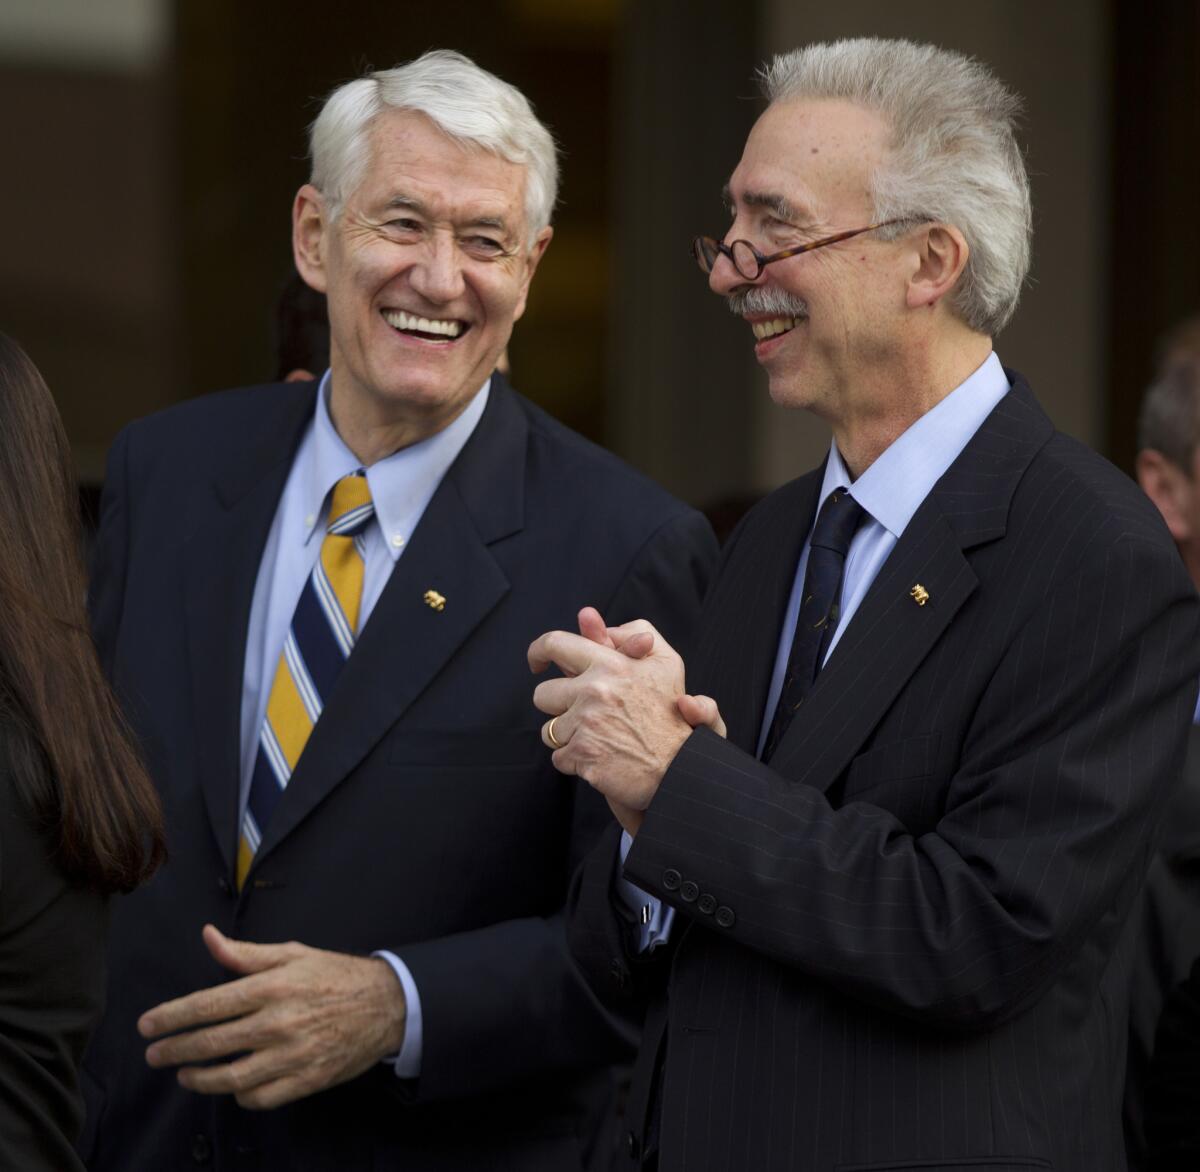 Nicholas Dirks, right, with Robert Birgenau, his predecessor as Berkeley chancellor, after his appointment in 2012.